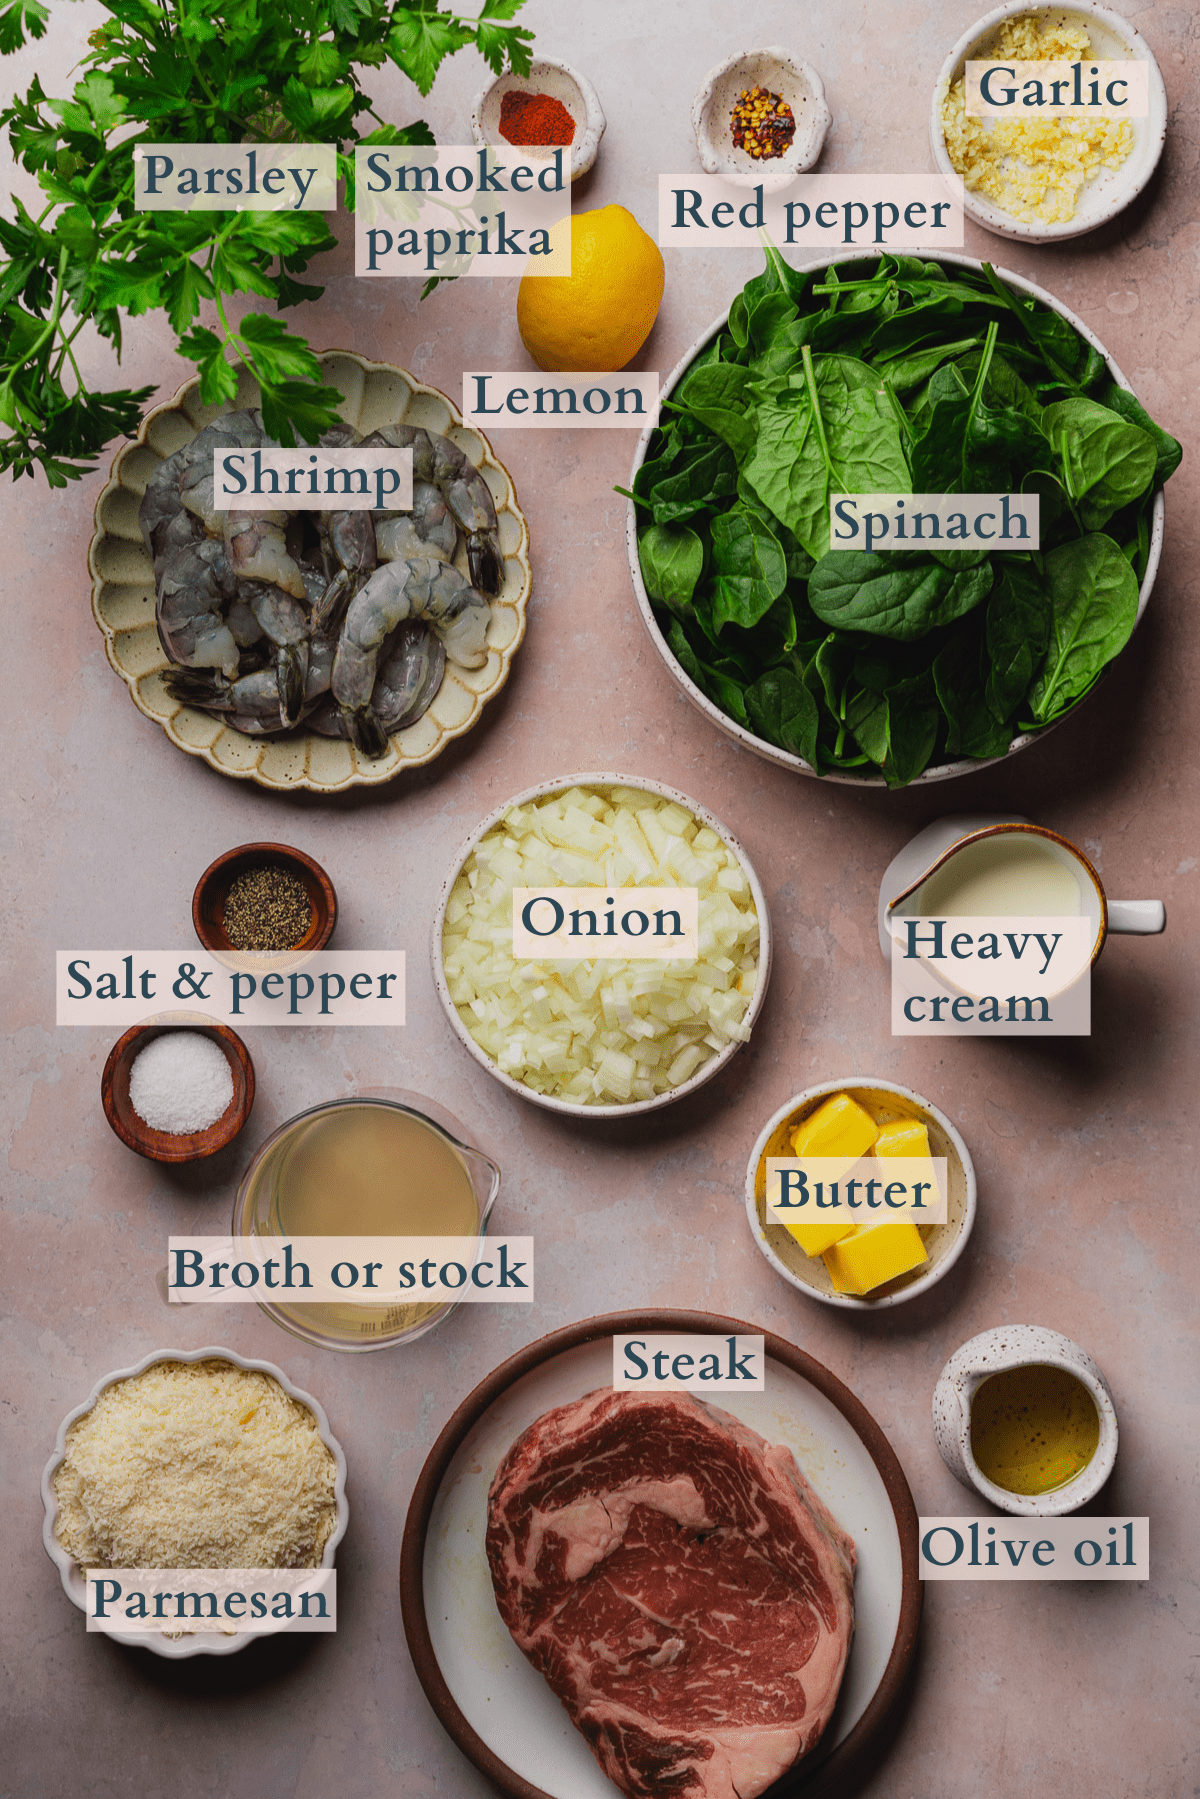 ingredients to make a steak and seafood recipe, with steak, shrimp, parmesan cheese, stock, heavy cream, spinach, salt and pepper, red pepper flakes, smoked paprika, lemon, butter, olive oil, parsley, onion, and garlic with text to denote. 